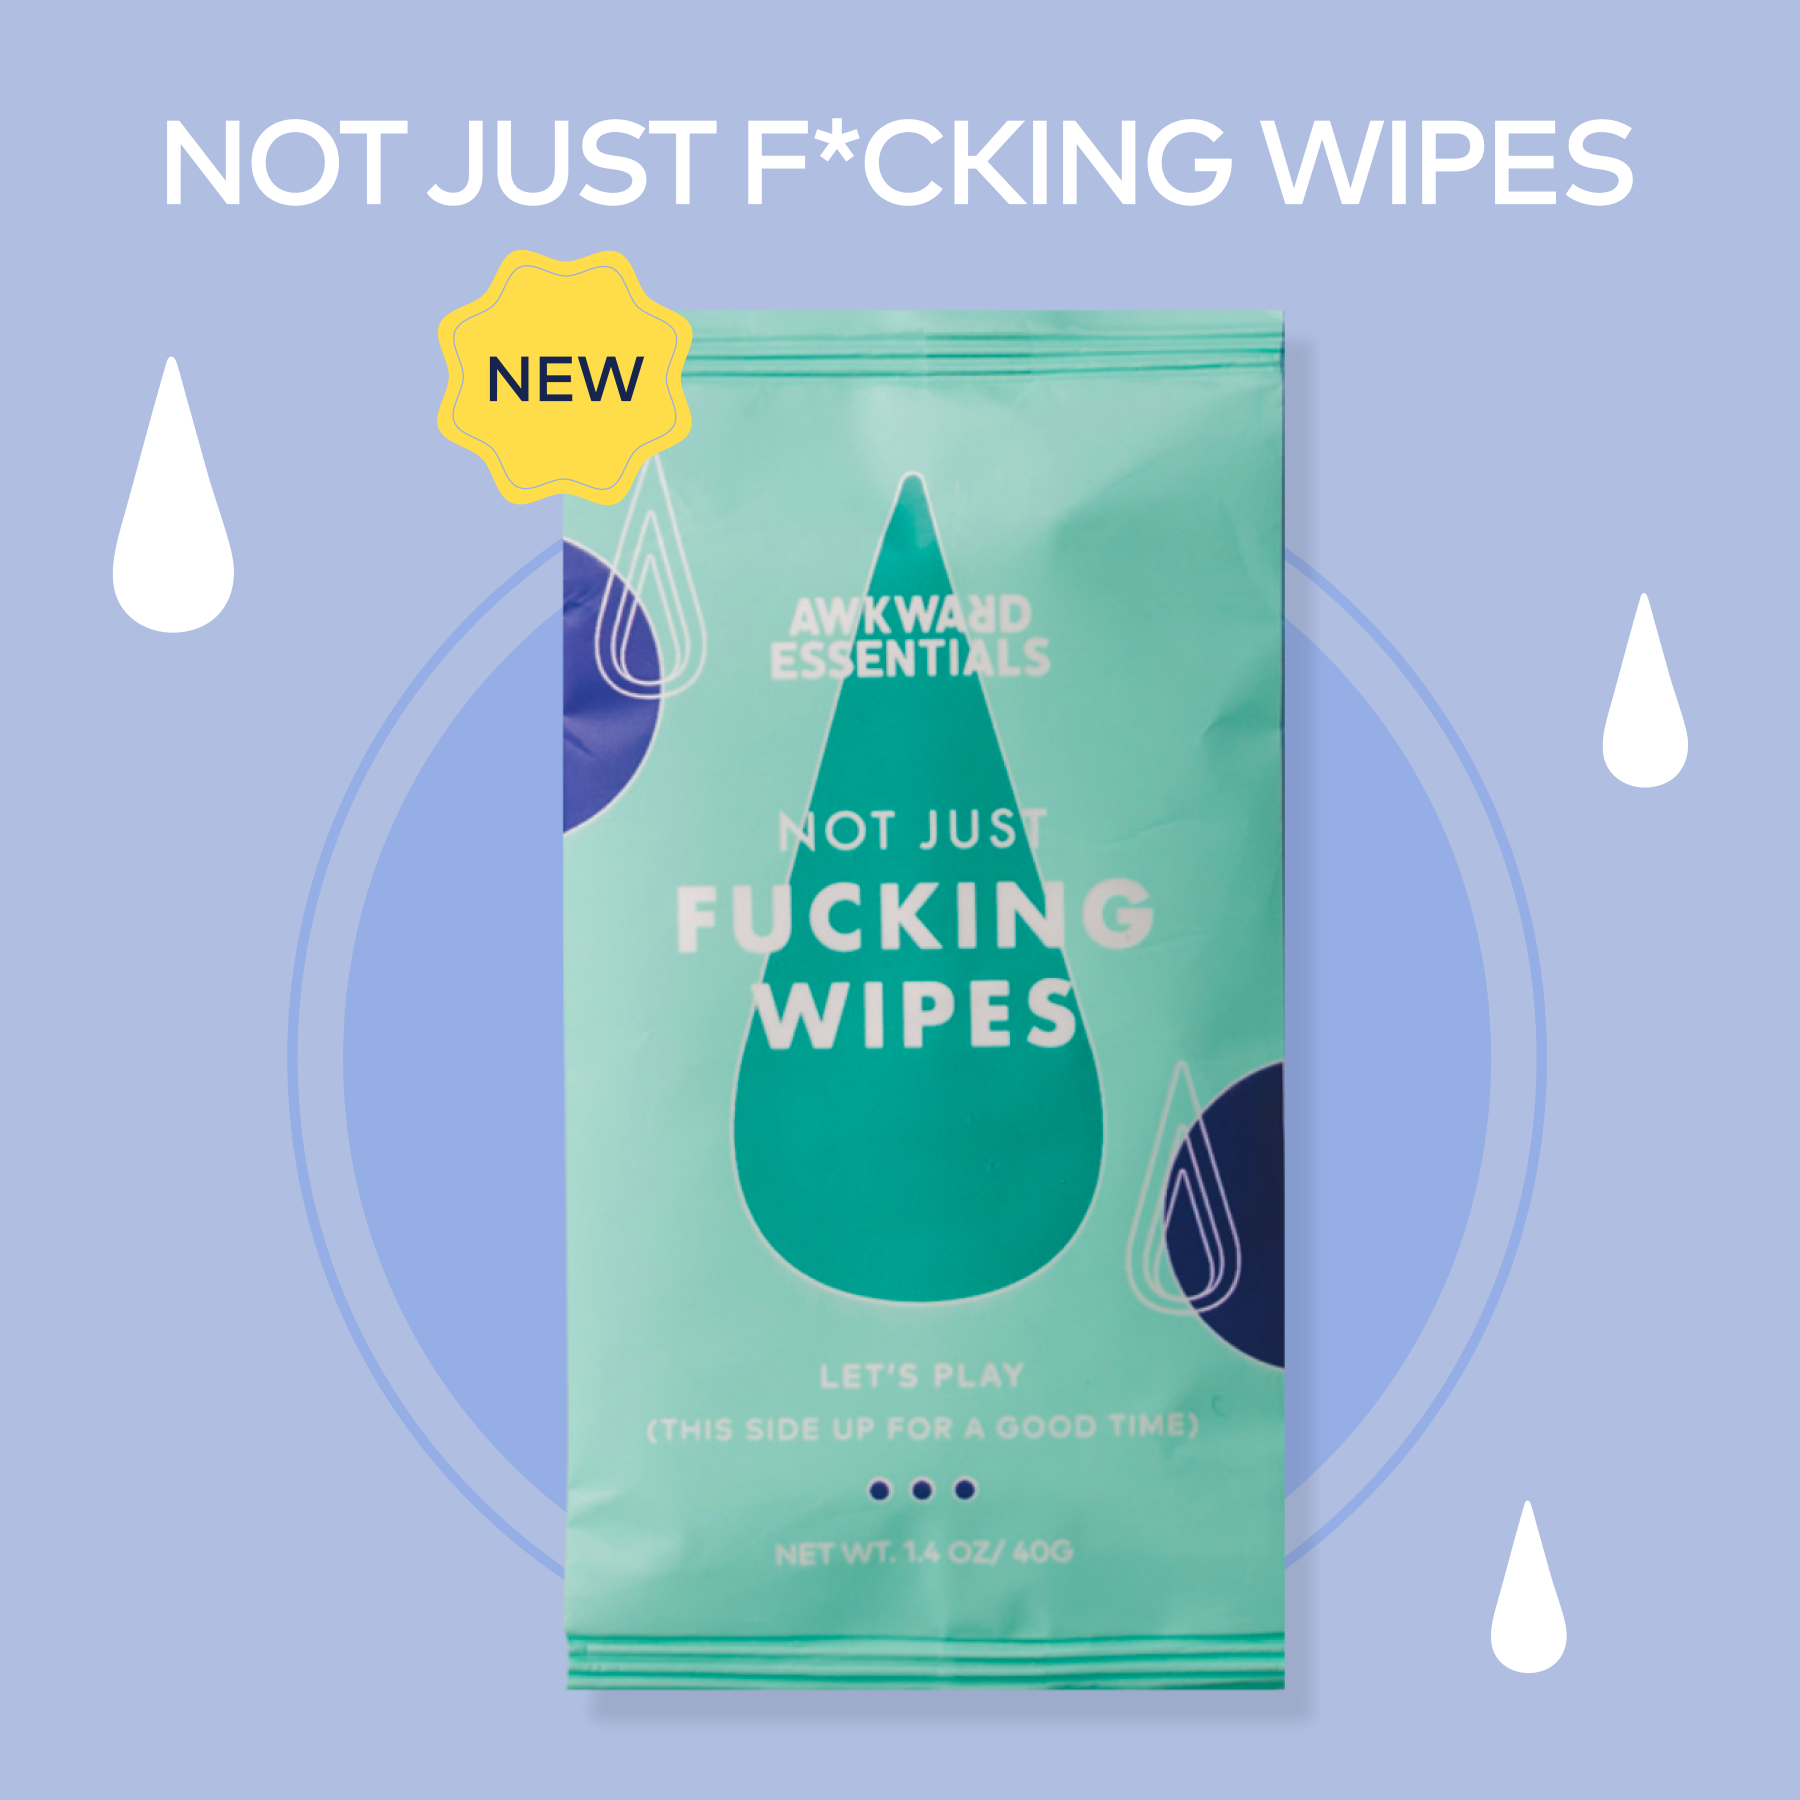 Not Just Fucking Wipes